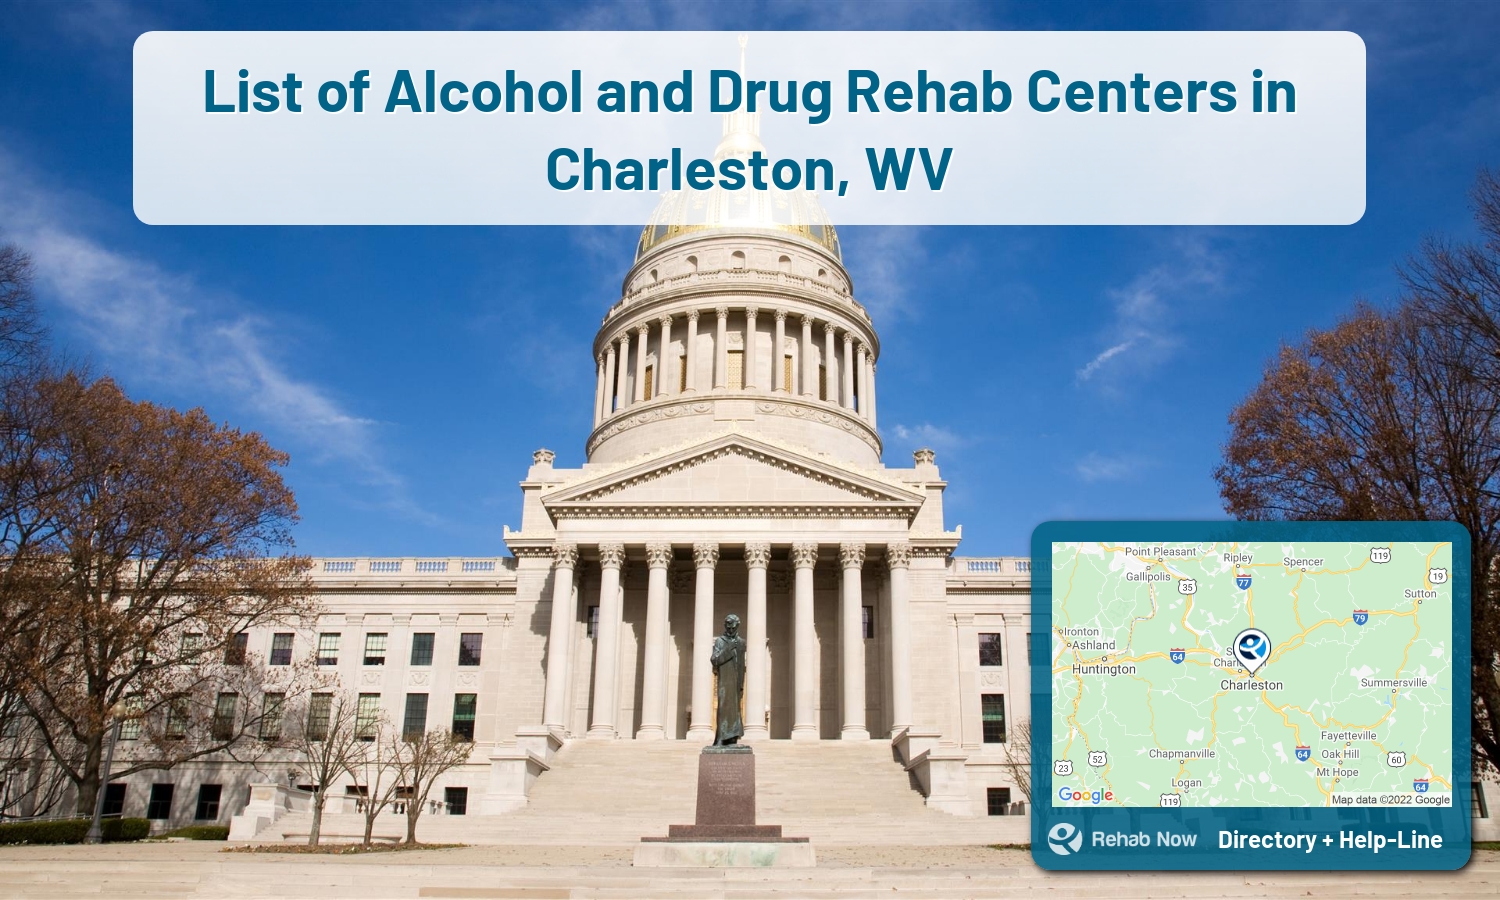 View options, availability, treatment methods, and more, for drug rehab and alcohol treatment in Charleston, West Virginia